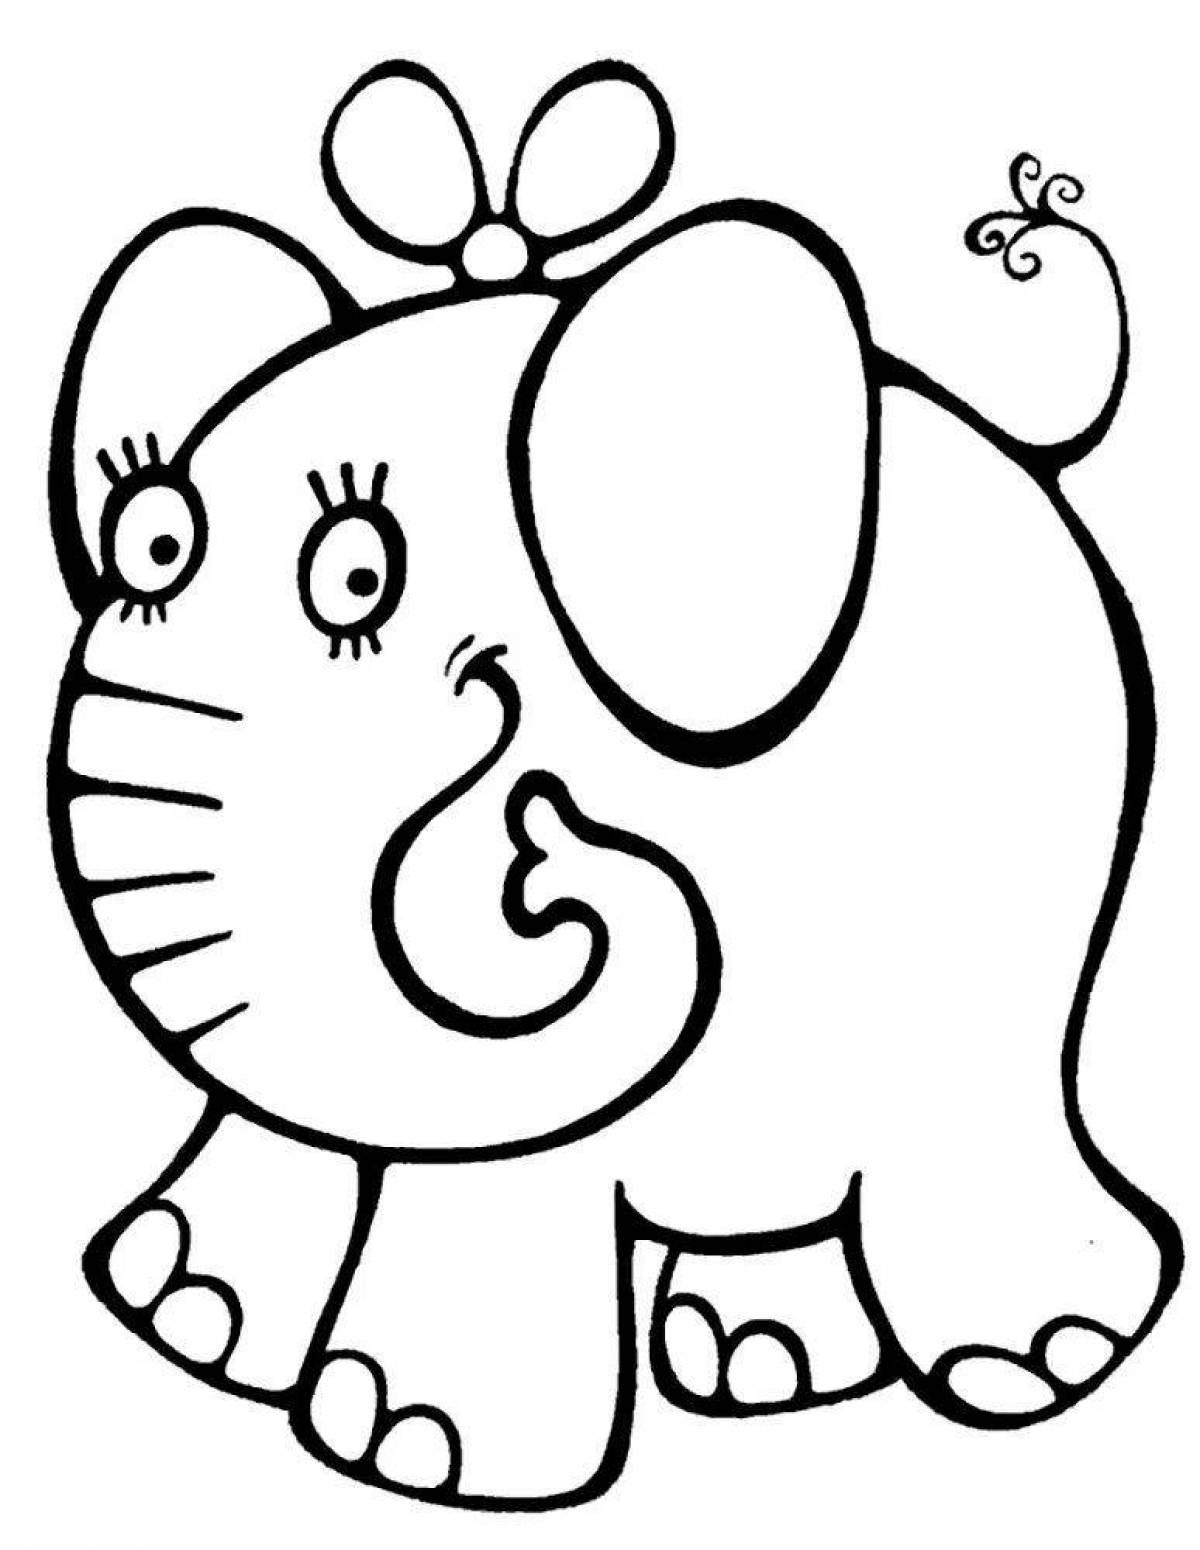 Violent elephant coloring pages for children 3-4 years old